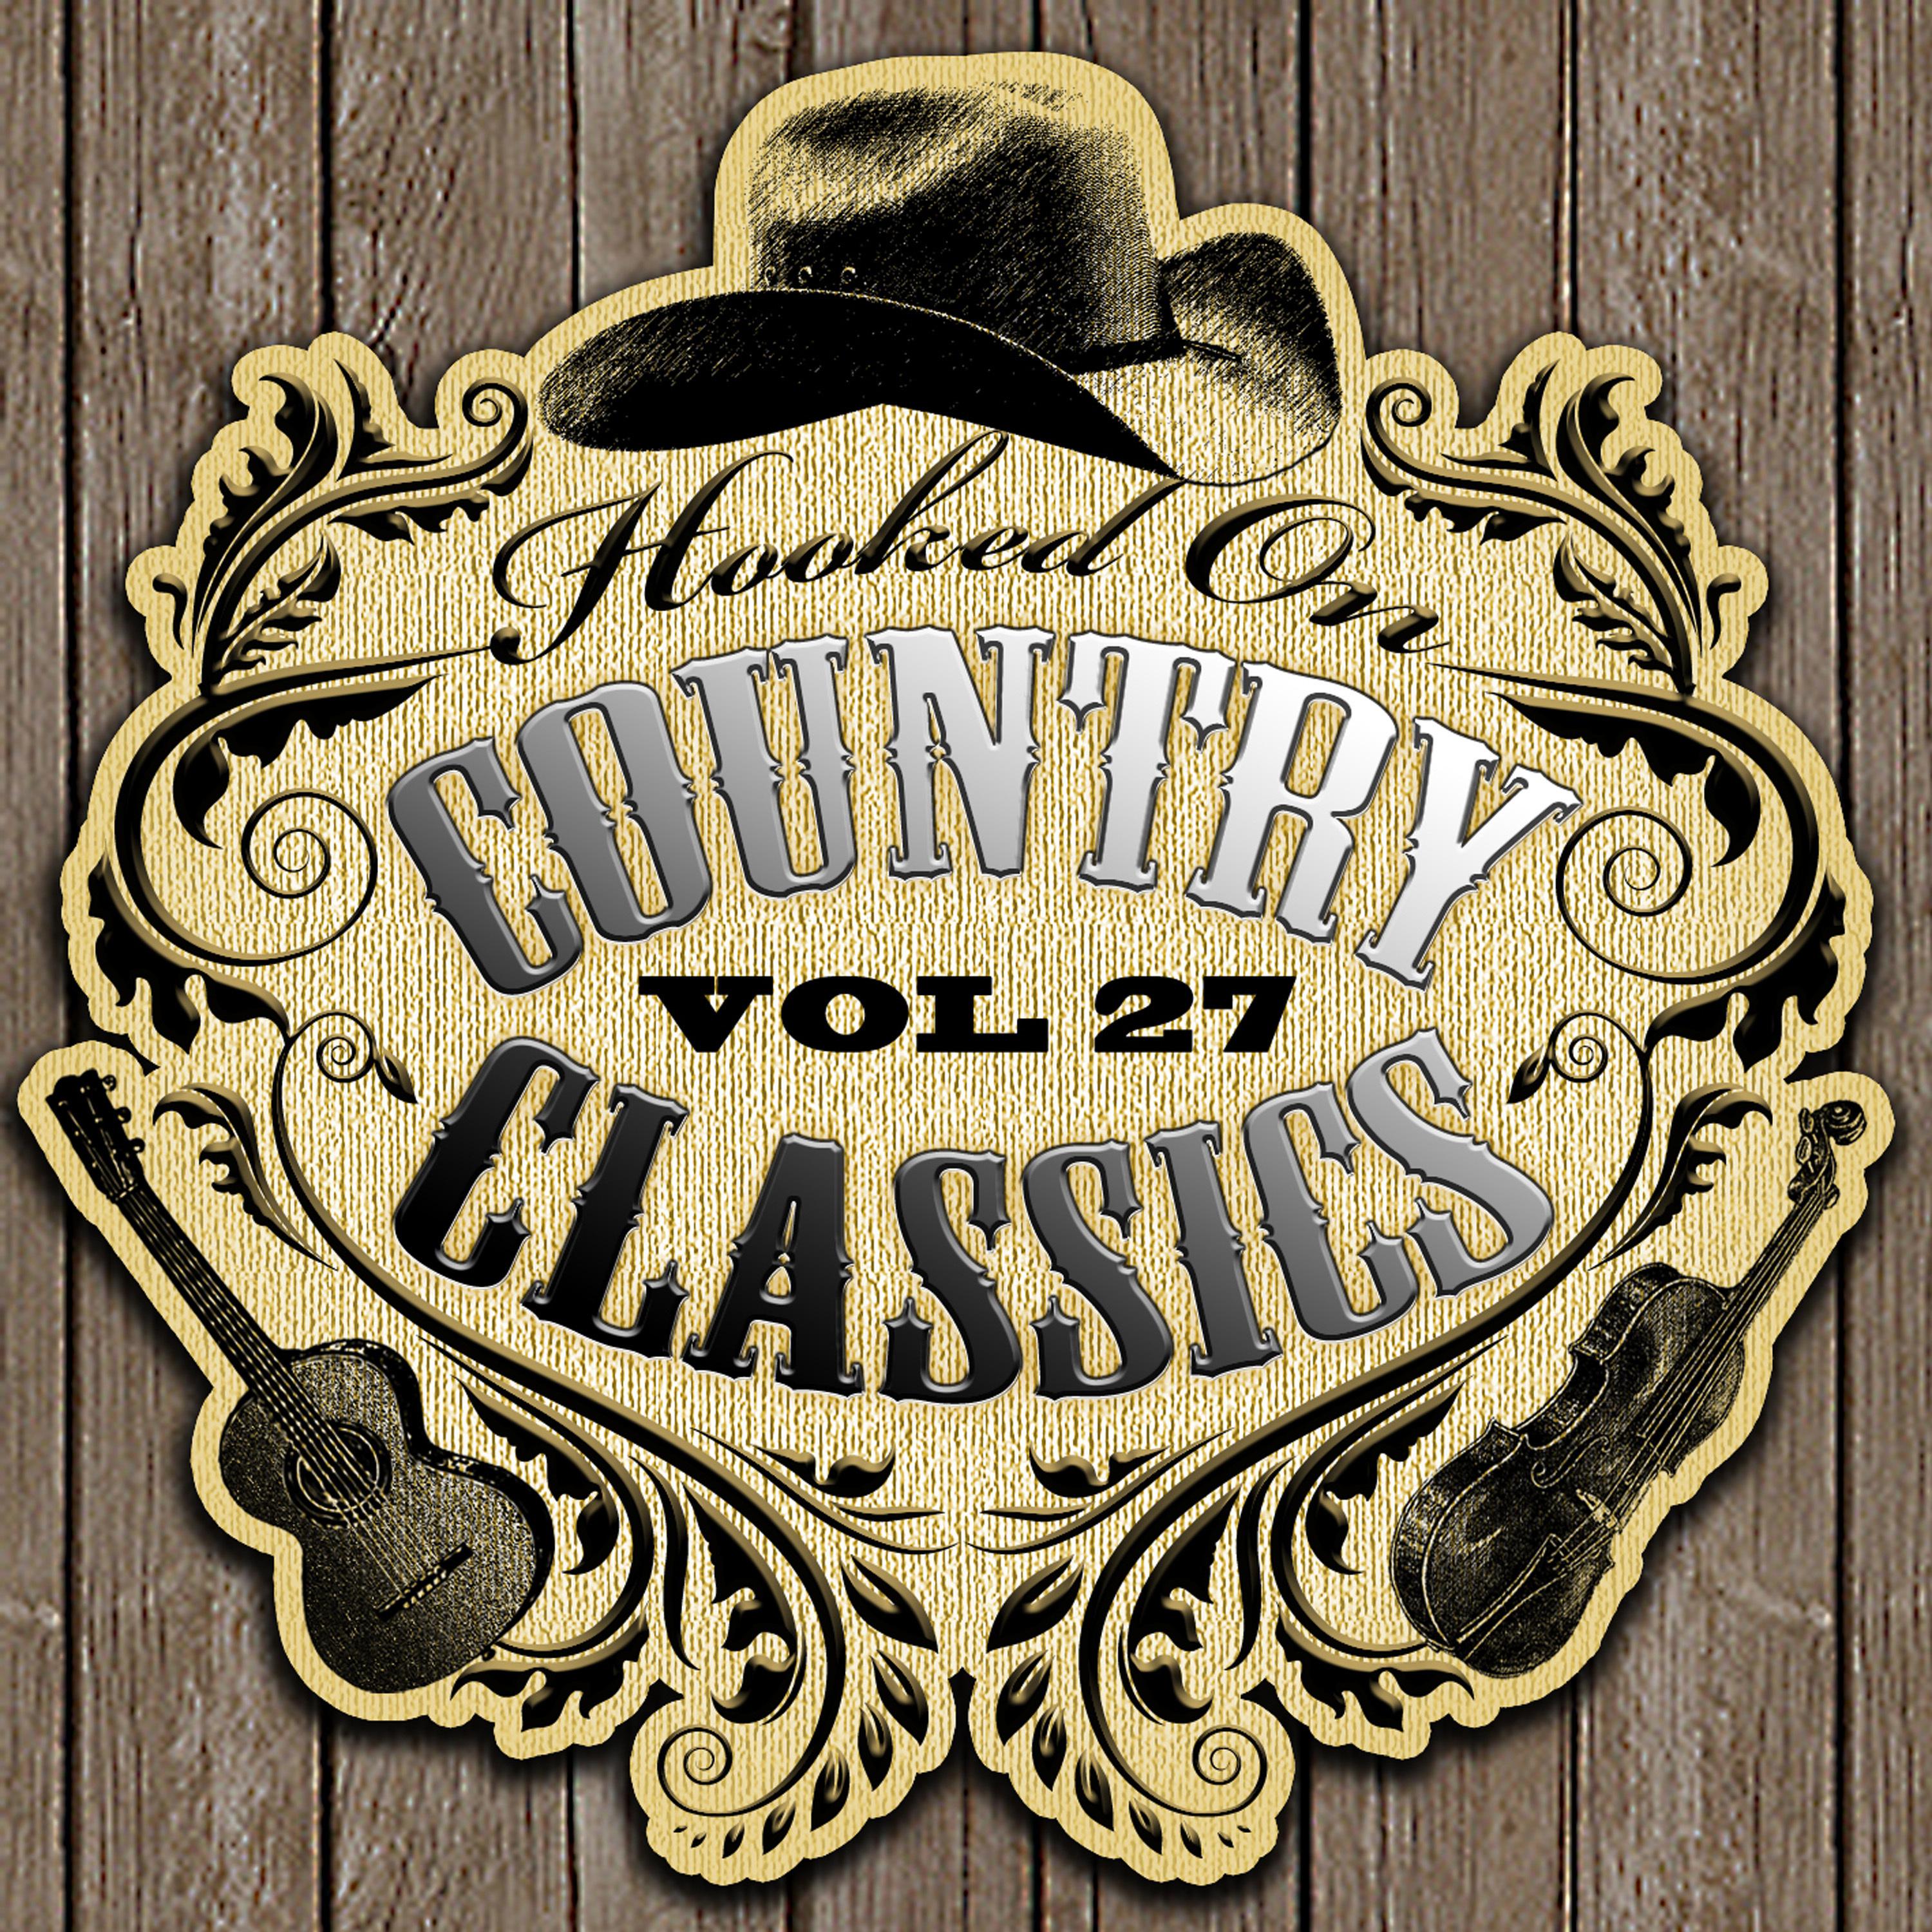 Hooked On Country Classics, Vol. 27